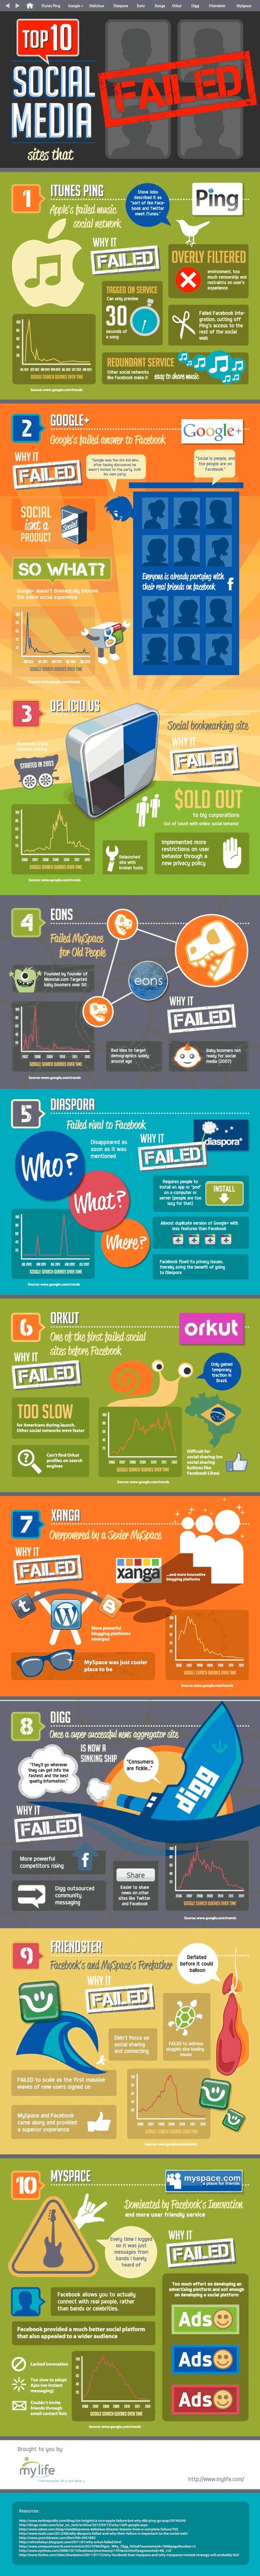 INFOGRAPHIC: Top 10 Failed Social Media Sites - MyLife | A New Society, a new education! | Scoop.it